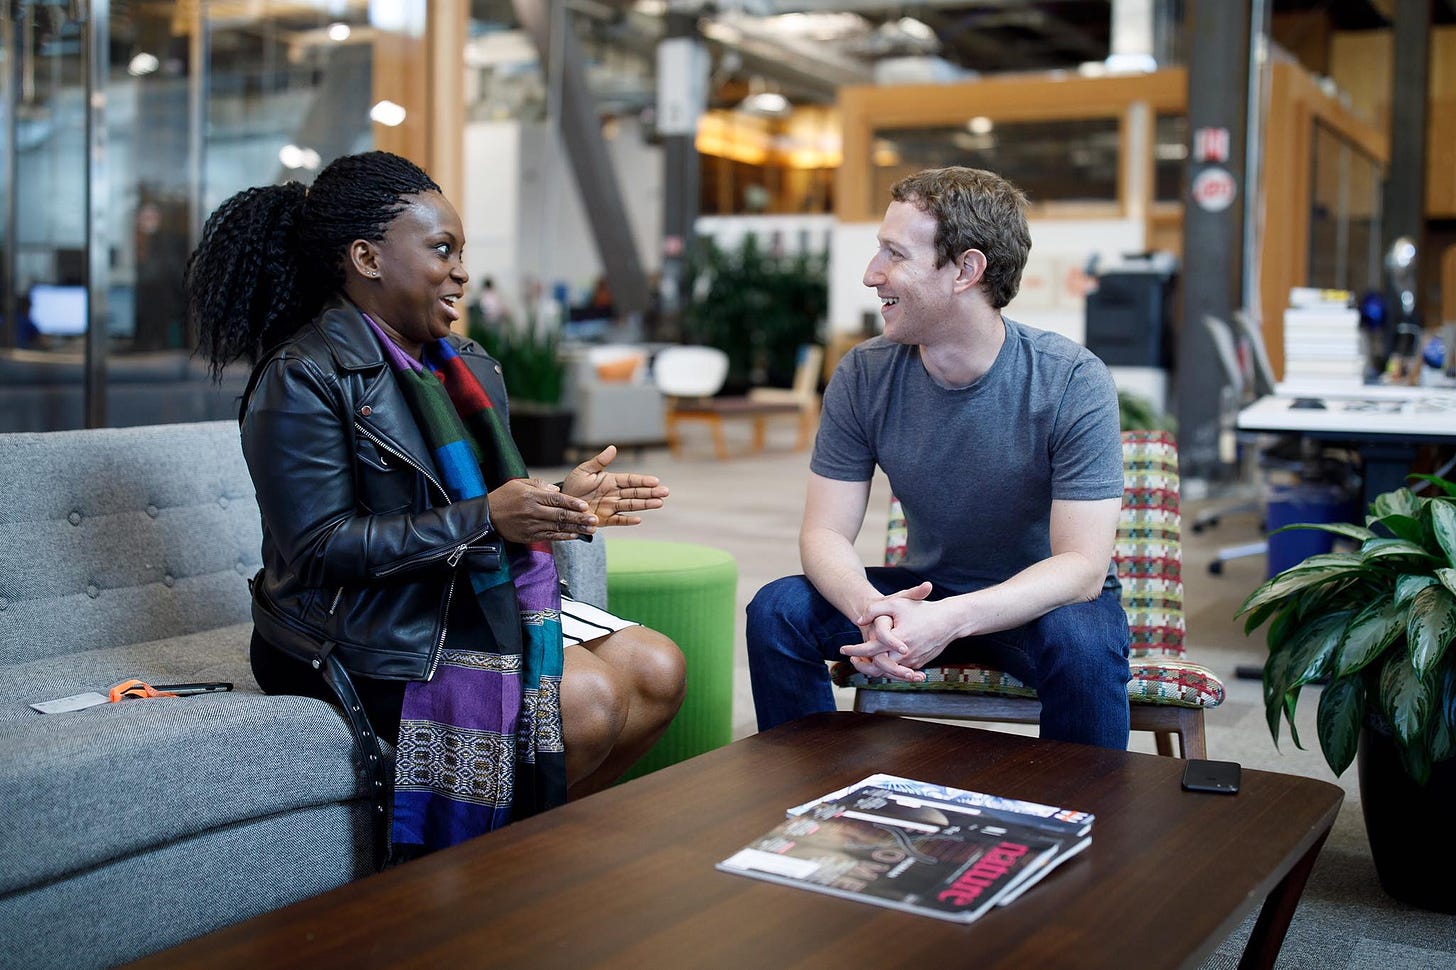 A photo of two people sitting and talking in a fancy office. At left, Lola is a Black woman with large braids wearing a leather jacket and long colorful scarf. At right is Mark Zuckerberg, a white man with jeans and a gray t-shirt.